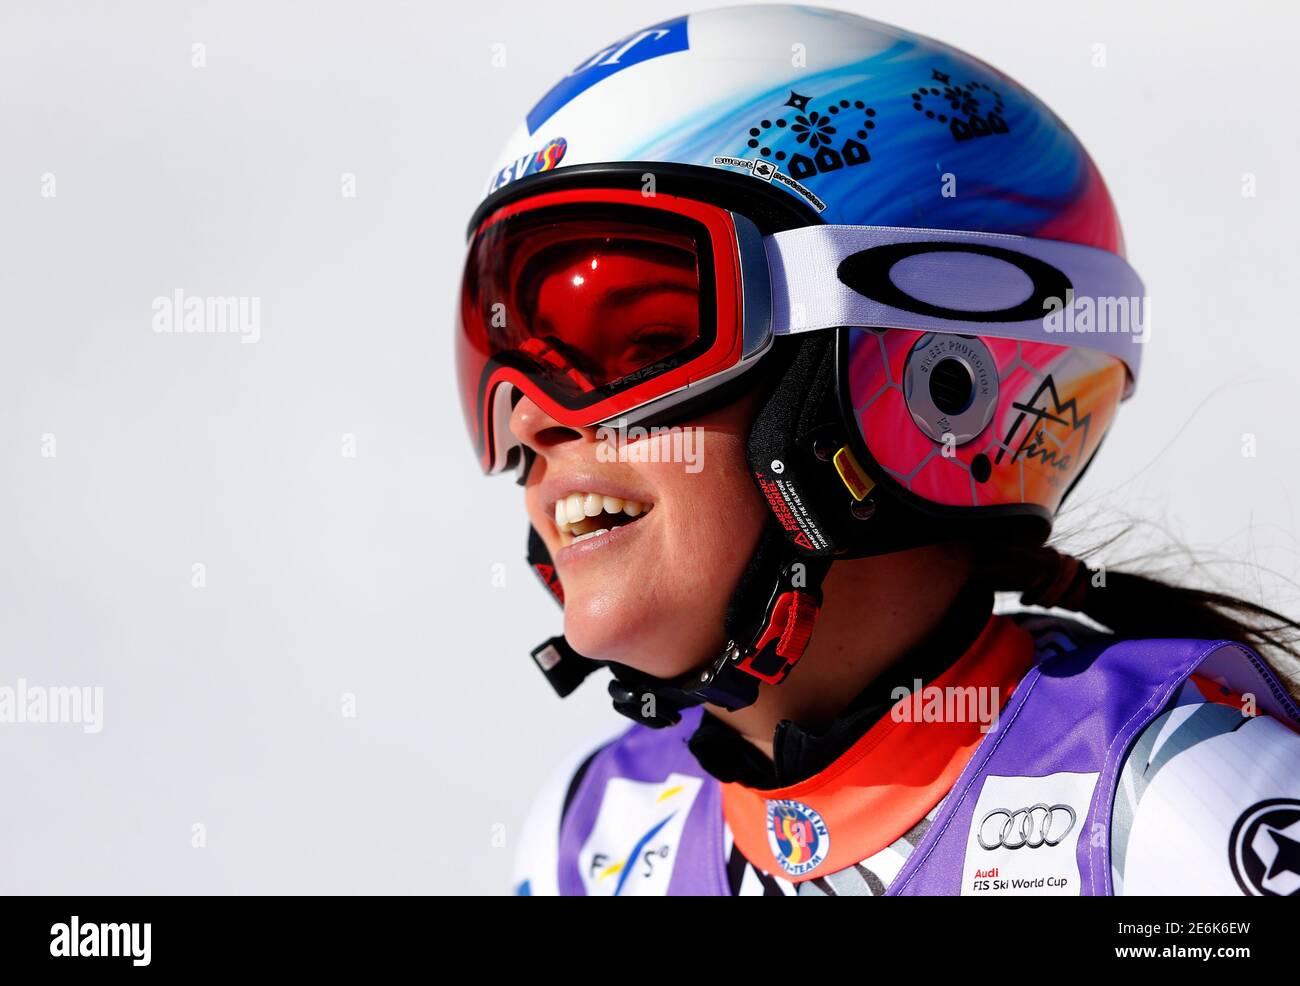 Tina Weirather of Liechtenstein reacts after crossing the finish line at  the alpine World Cup Ladies' Giant Slalom race on the Rettenbach glacier in  the Tyrolean ski resort of Soelden, Austria, October